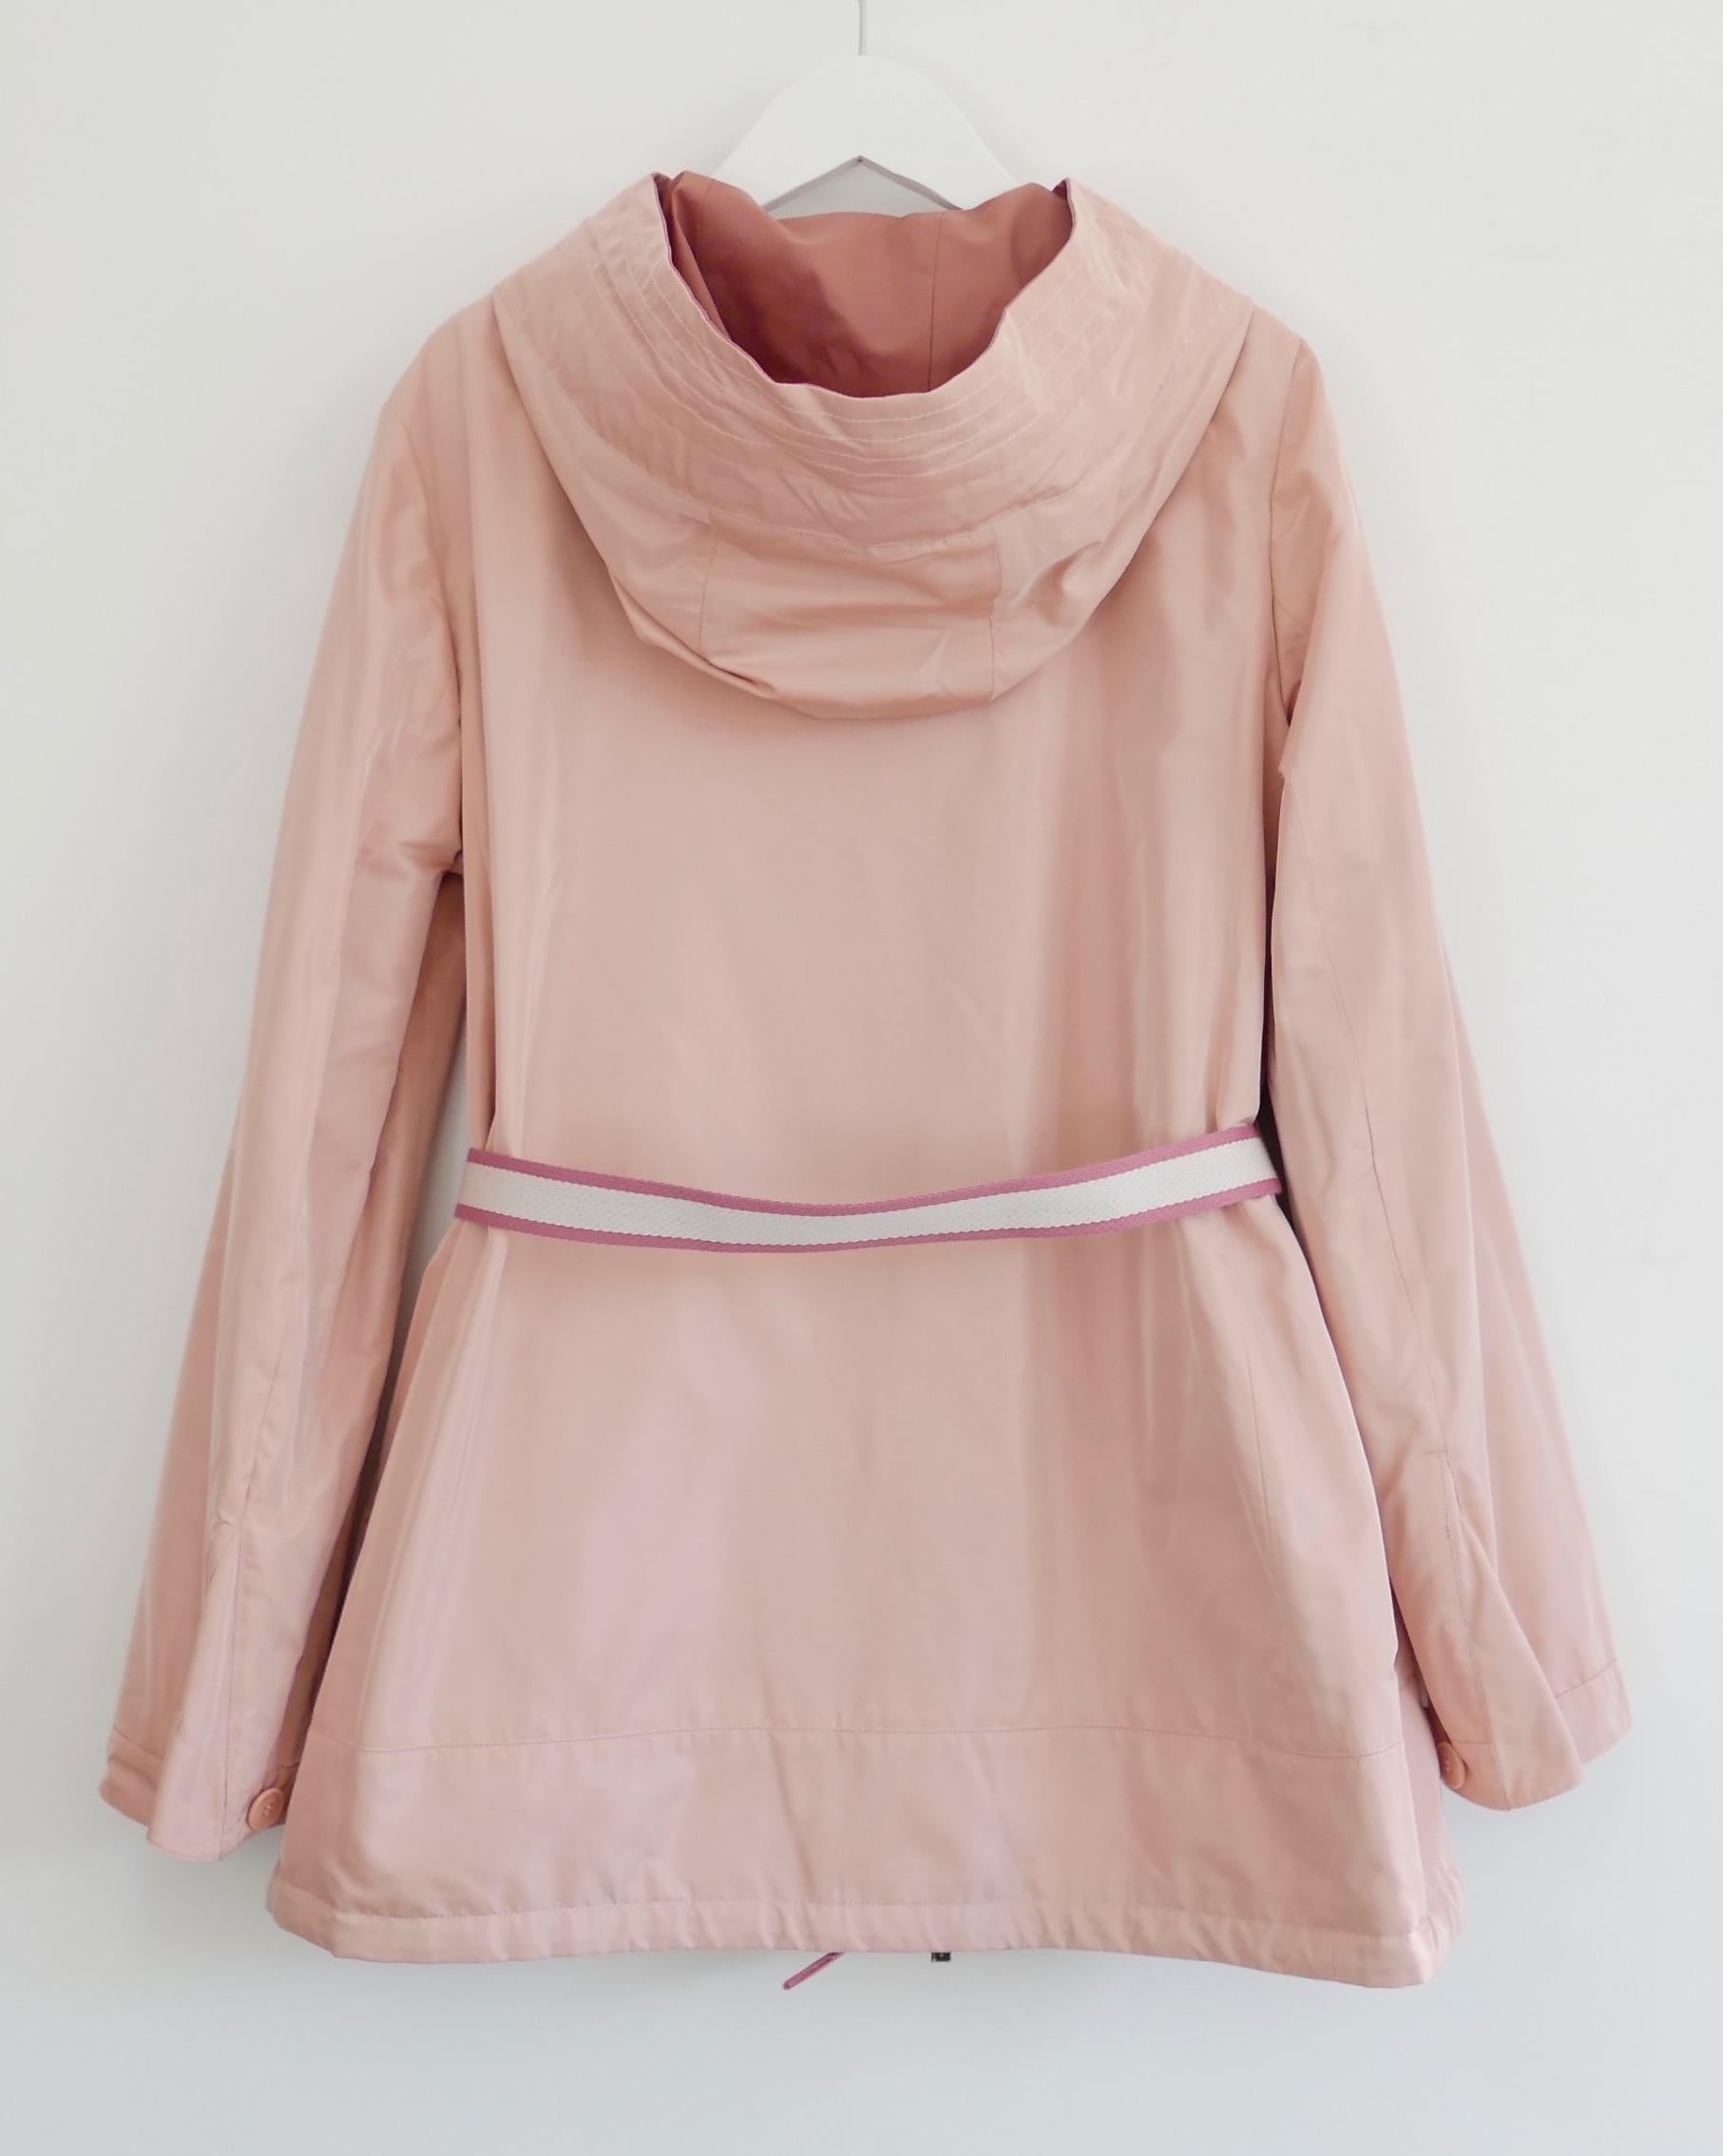 Gorgeous Loro Piana Ashton Reversible anorak jacket in colourway Antique Pink/Light Rose. Bought for $3970 and new with tags/spare buttons. Fully reversible, it is a soft polyester/silk on one side and a glossy, coated polyester on the other. Has a